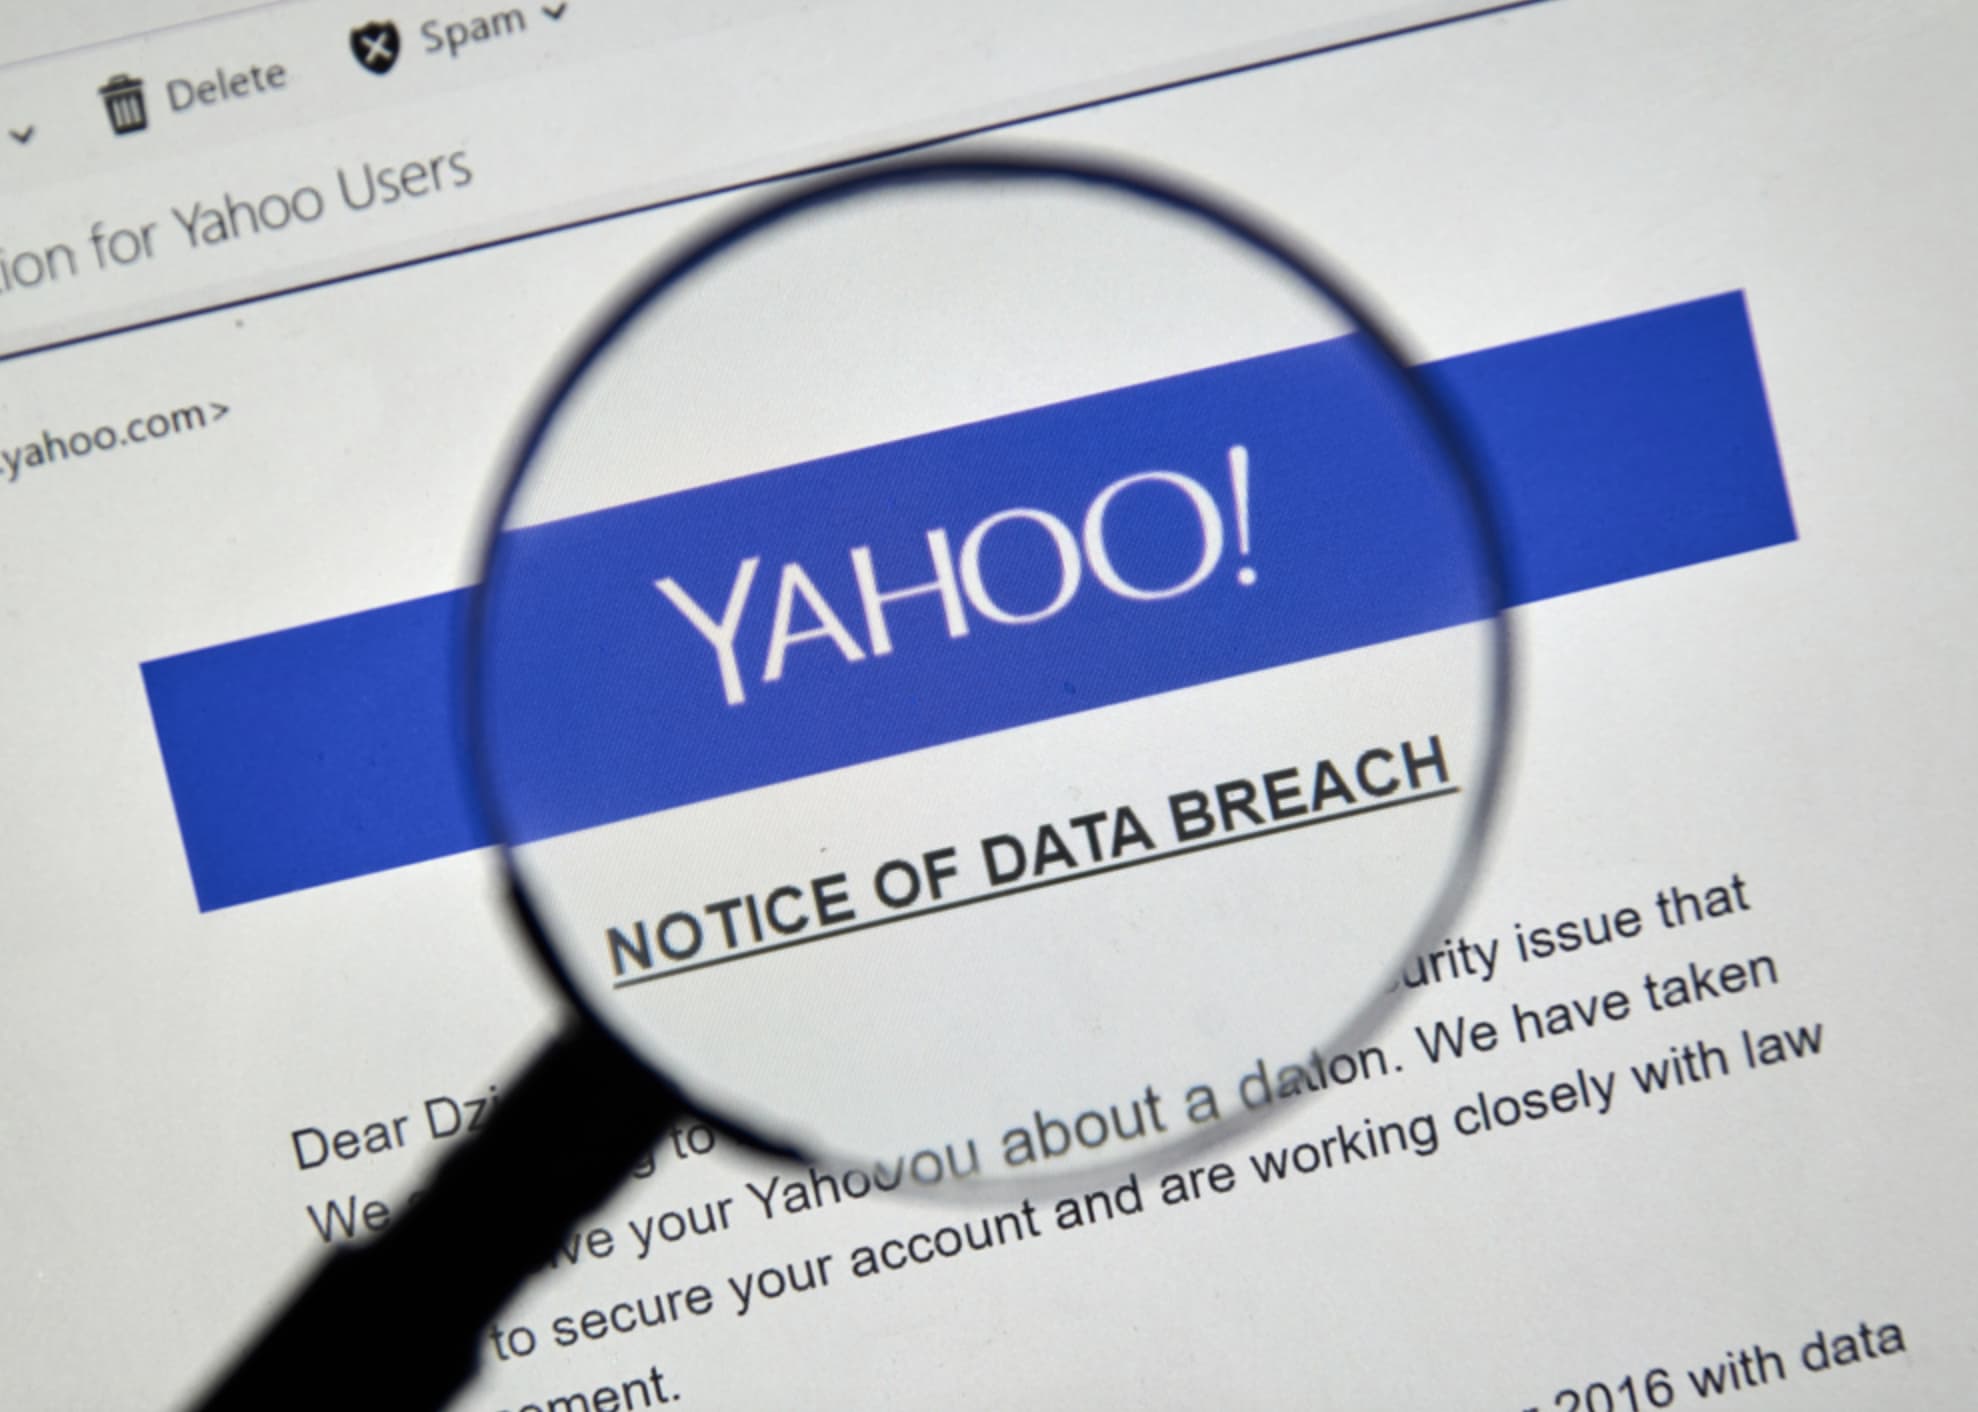 yahoo data breach case study - Delete Spam ion for Yahoo Users yahoo.com> Yahoo! Notice Of Data Breach Dear Dz We to urity issue that ve your Yahovou about a daton. We have taken to secure your account and are working closely with law ment. 2016 with data